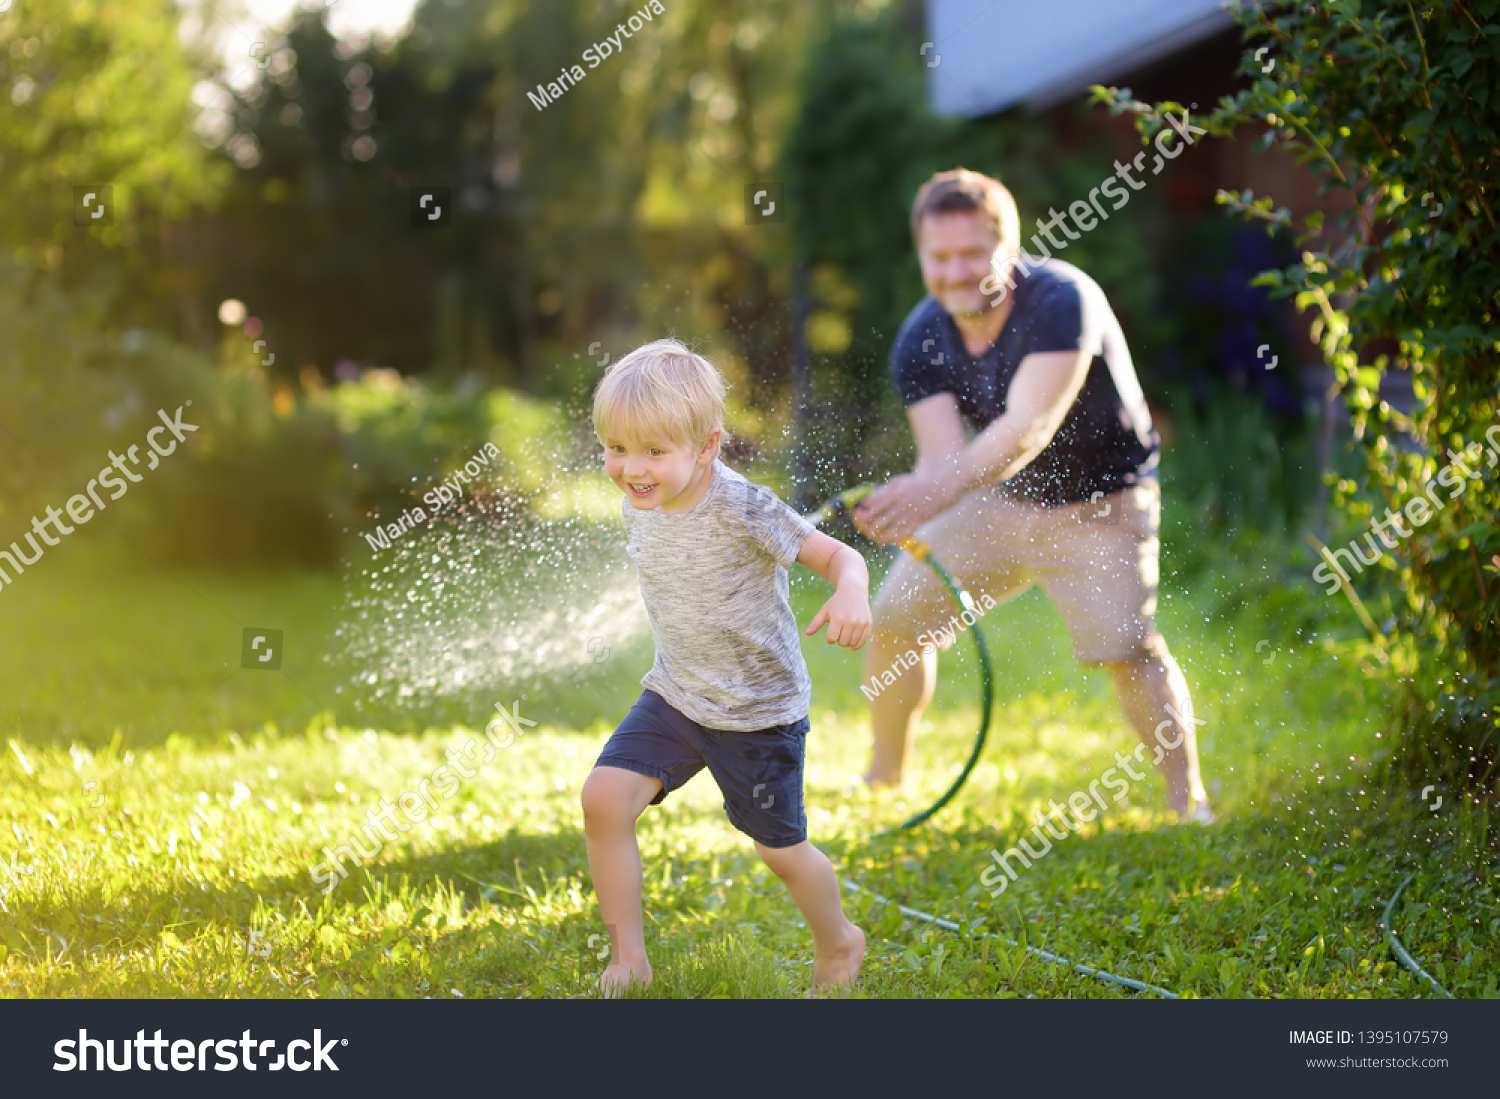 Funny little boy with his father playing with garden hose in sunny backyard. Preschooler child having fun with spray of water. Summer outdoors activity for kids. #1395107579